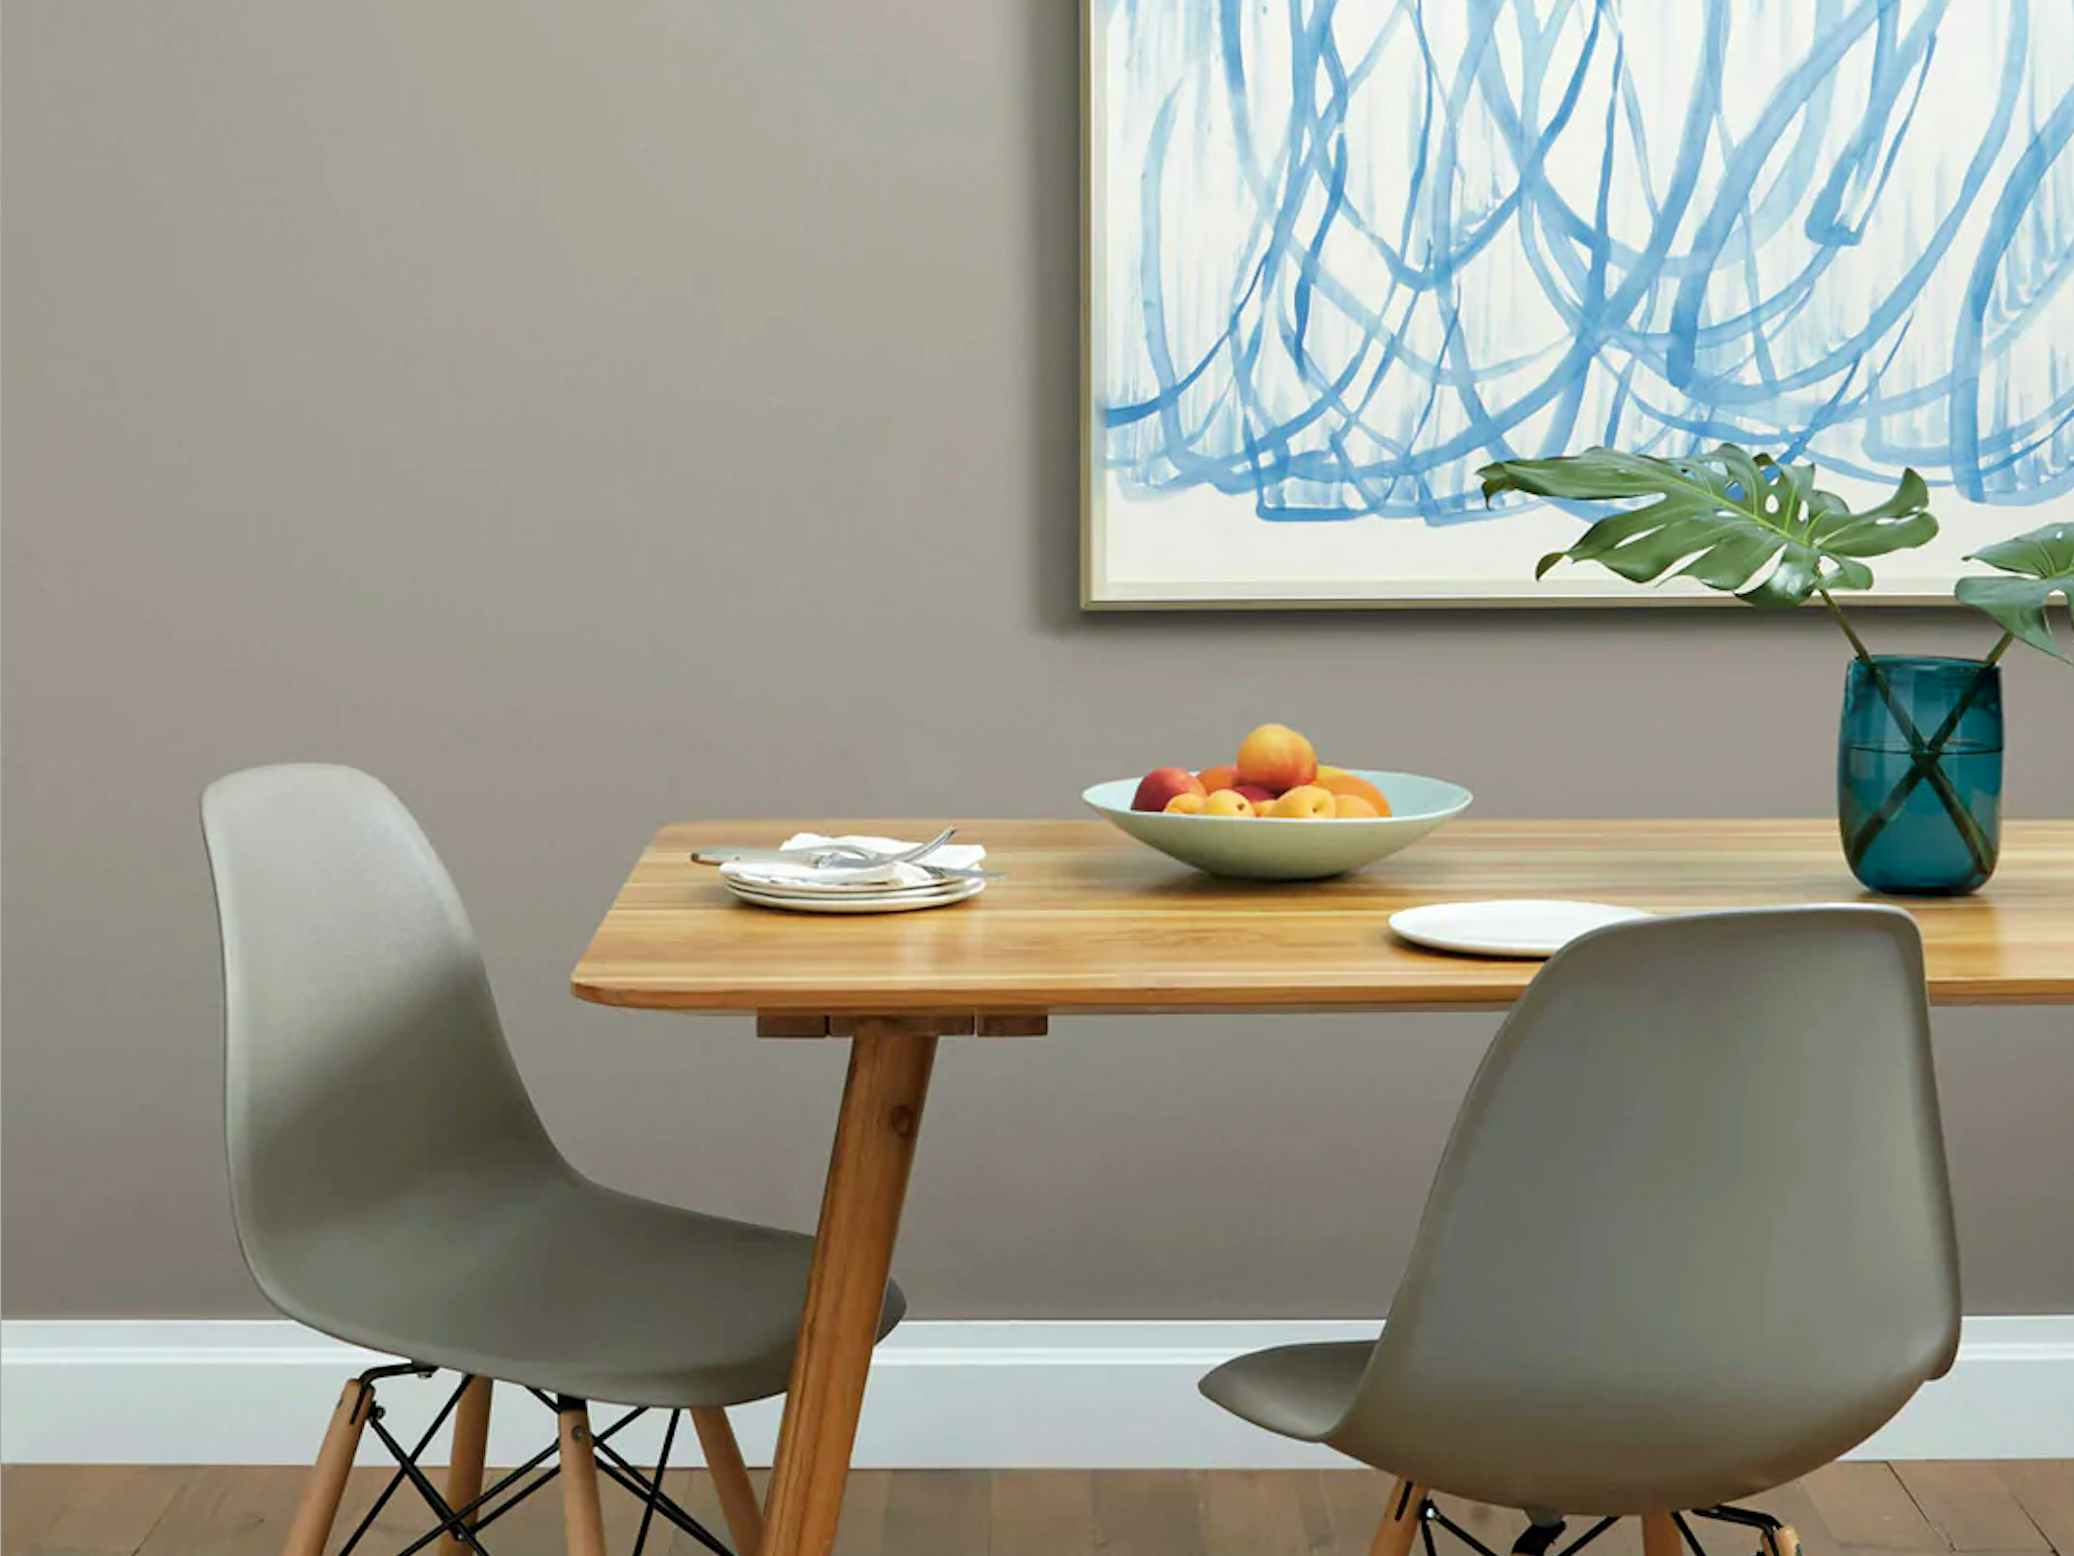 clare greige walls in dining room